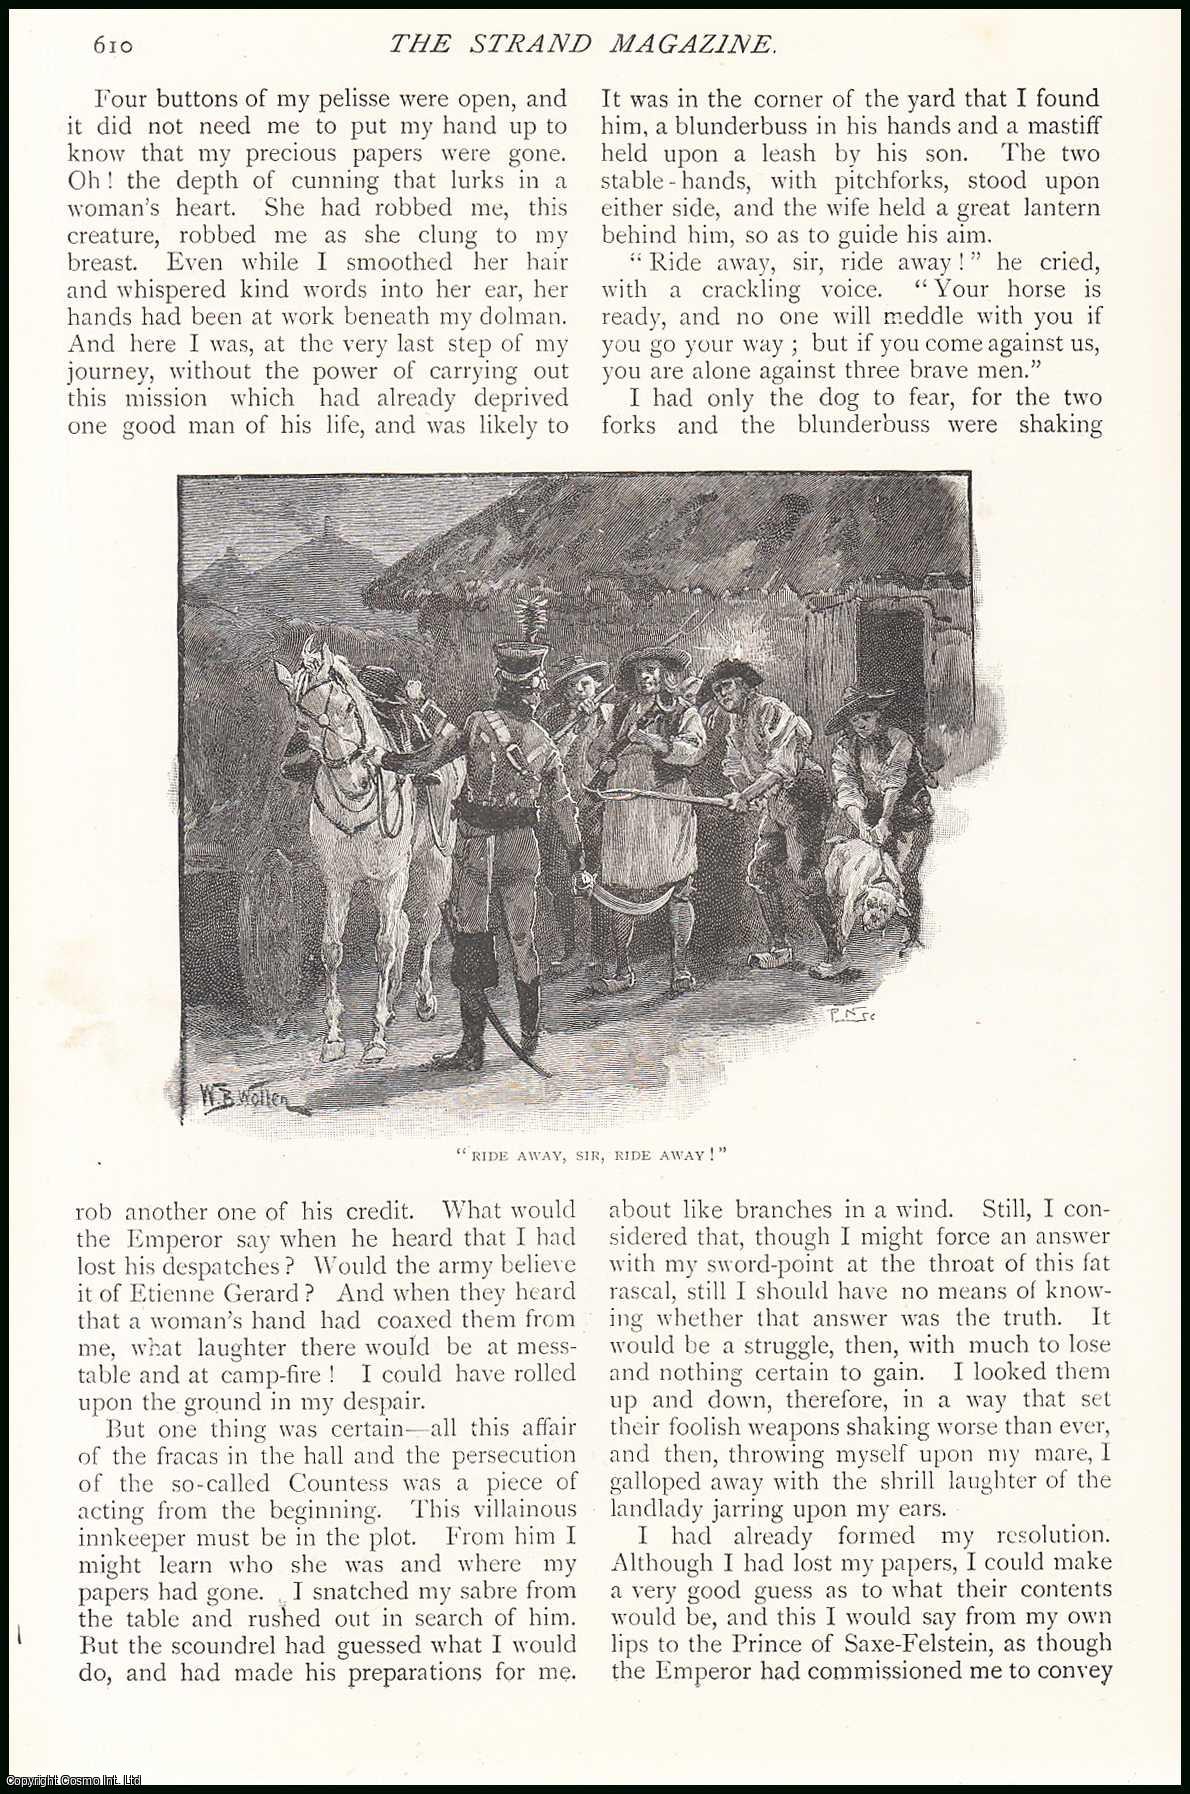 Arthur Conan Doyle - How The Brigadier Played for a Kingdom, by A. Conan Doyale : The Exploits of Brigadier Gerard. An uncommon original article from The Strand Magazine, 1895.